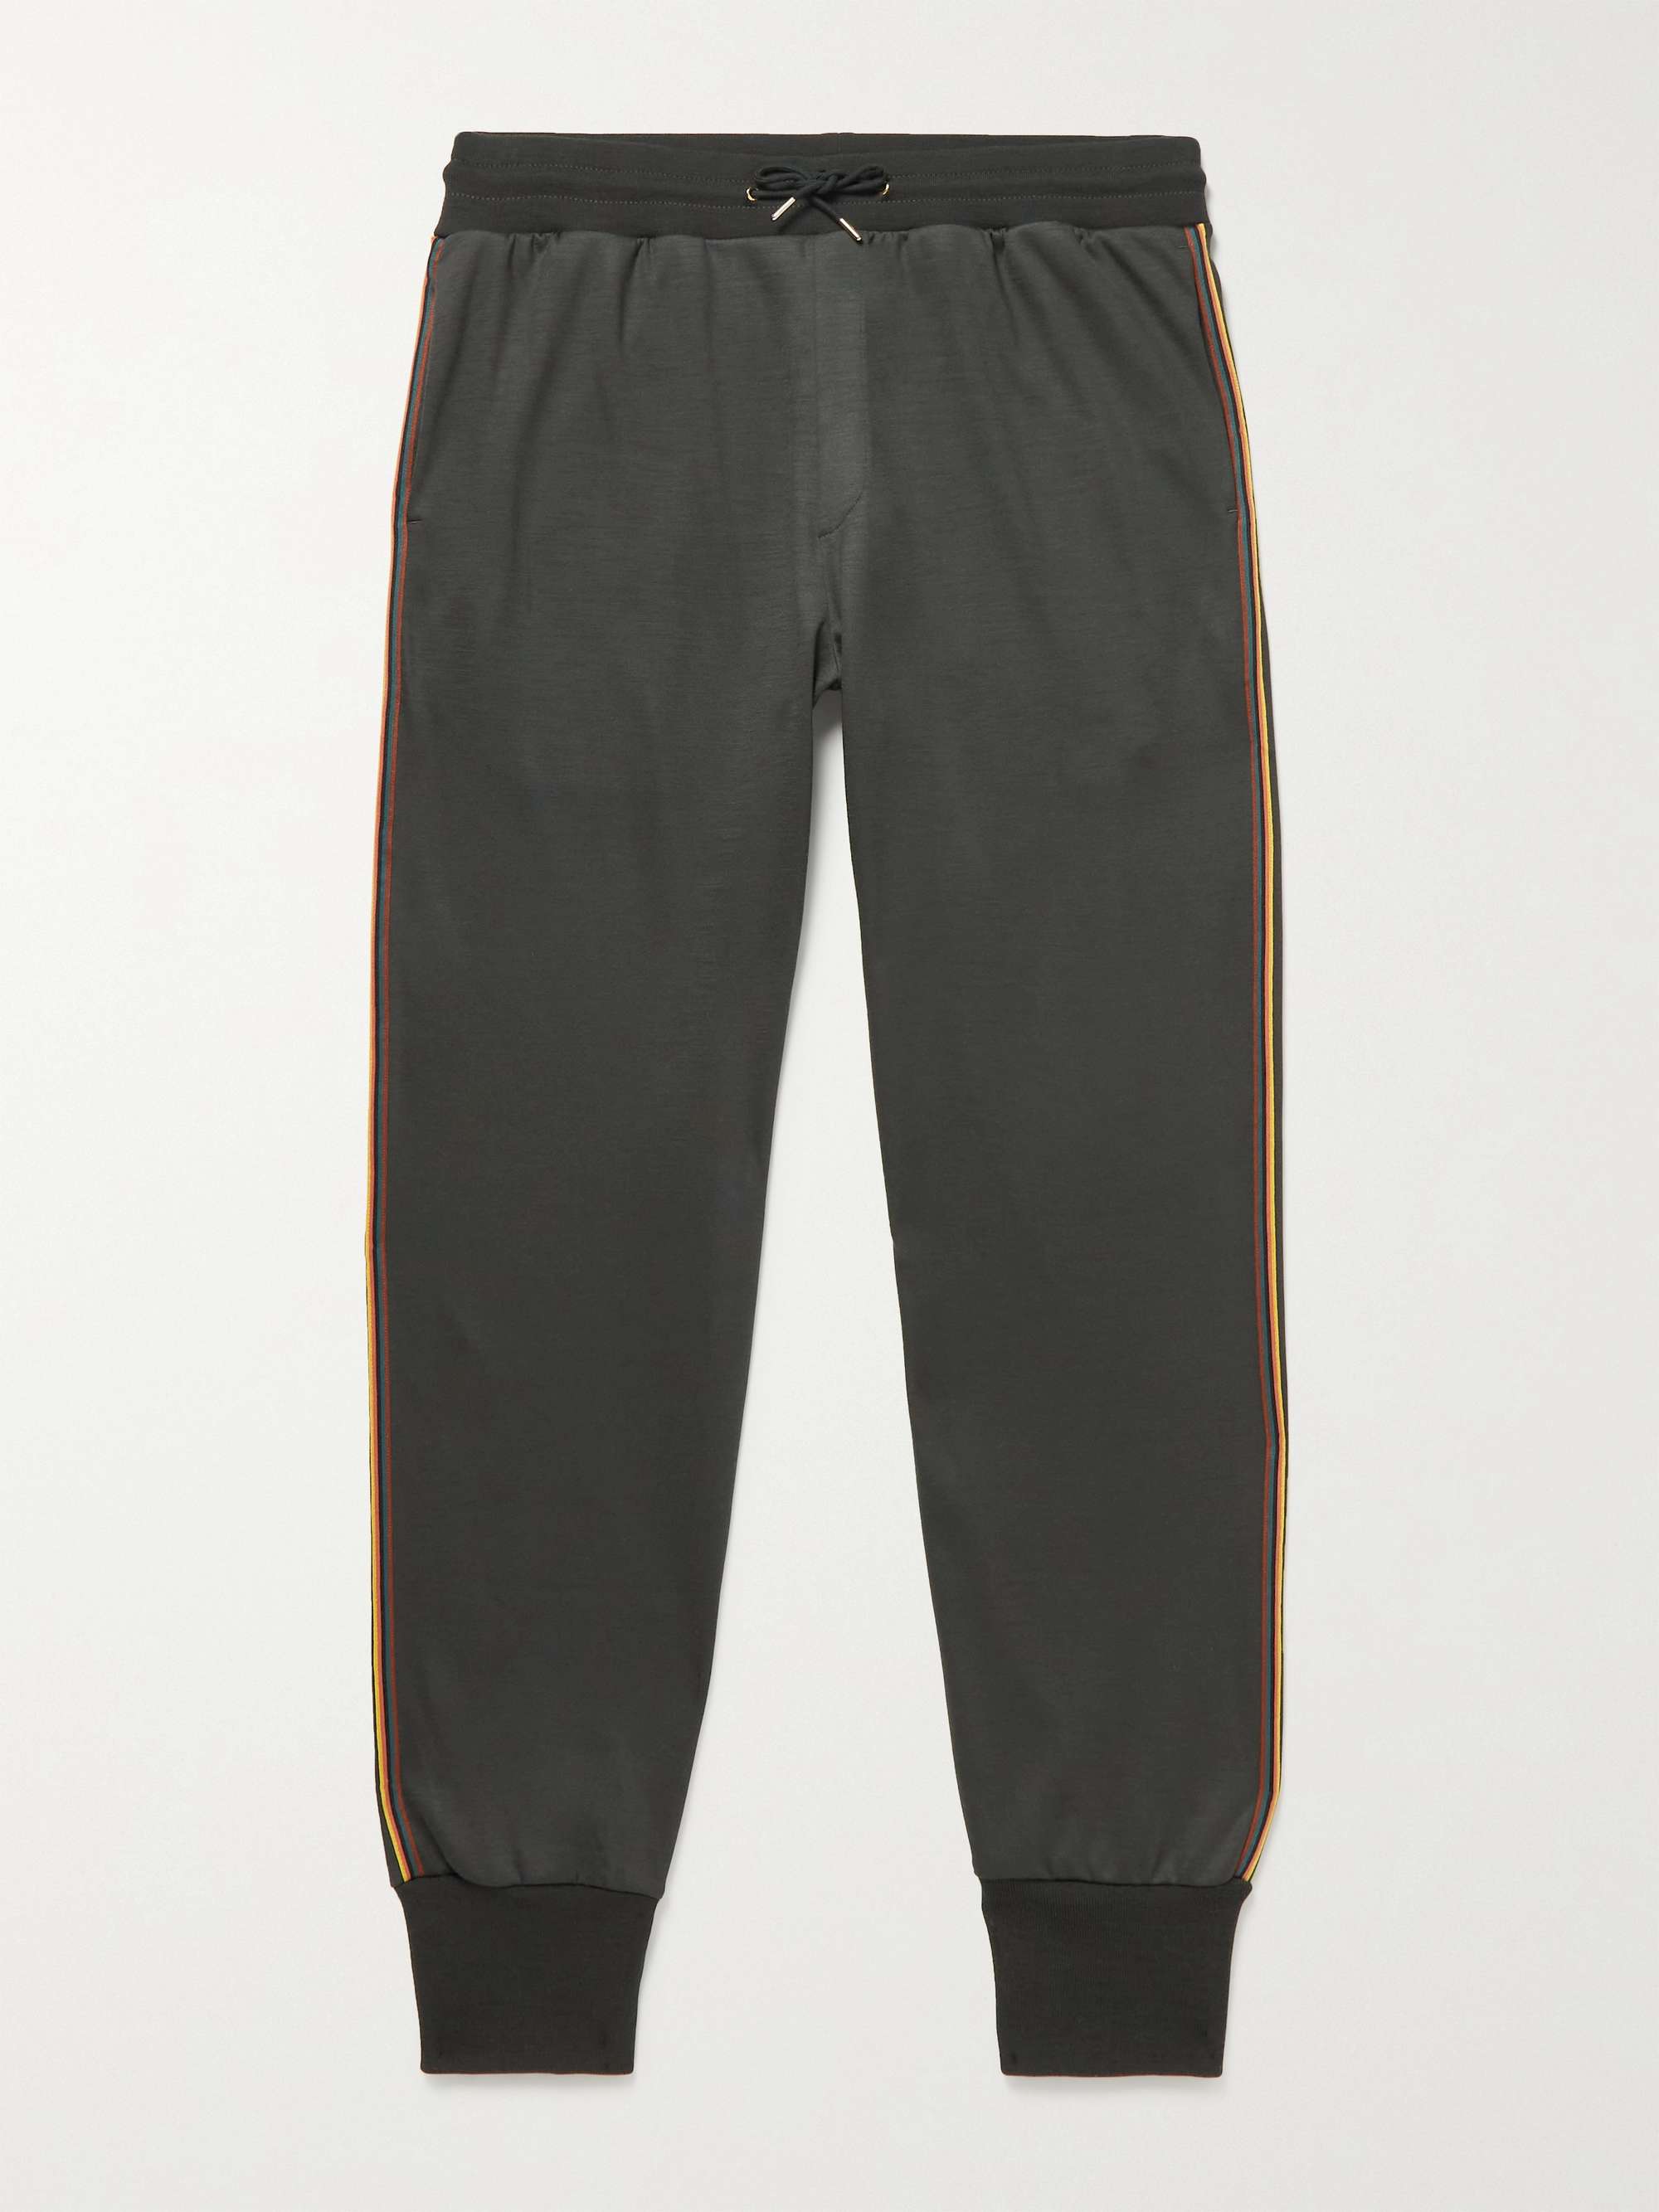 PAUL SMITH Tapered Striped Webbing-Trimmed Wool Sweatpants